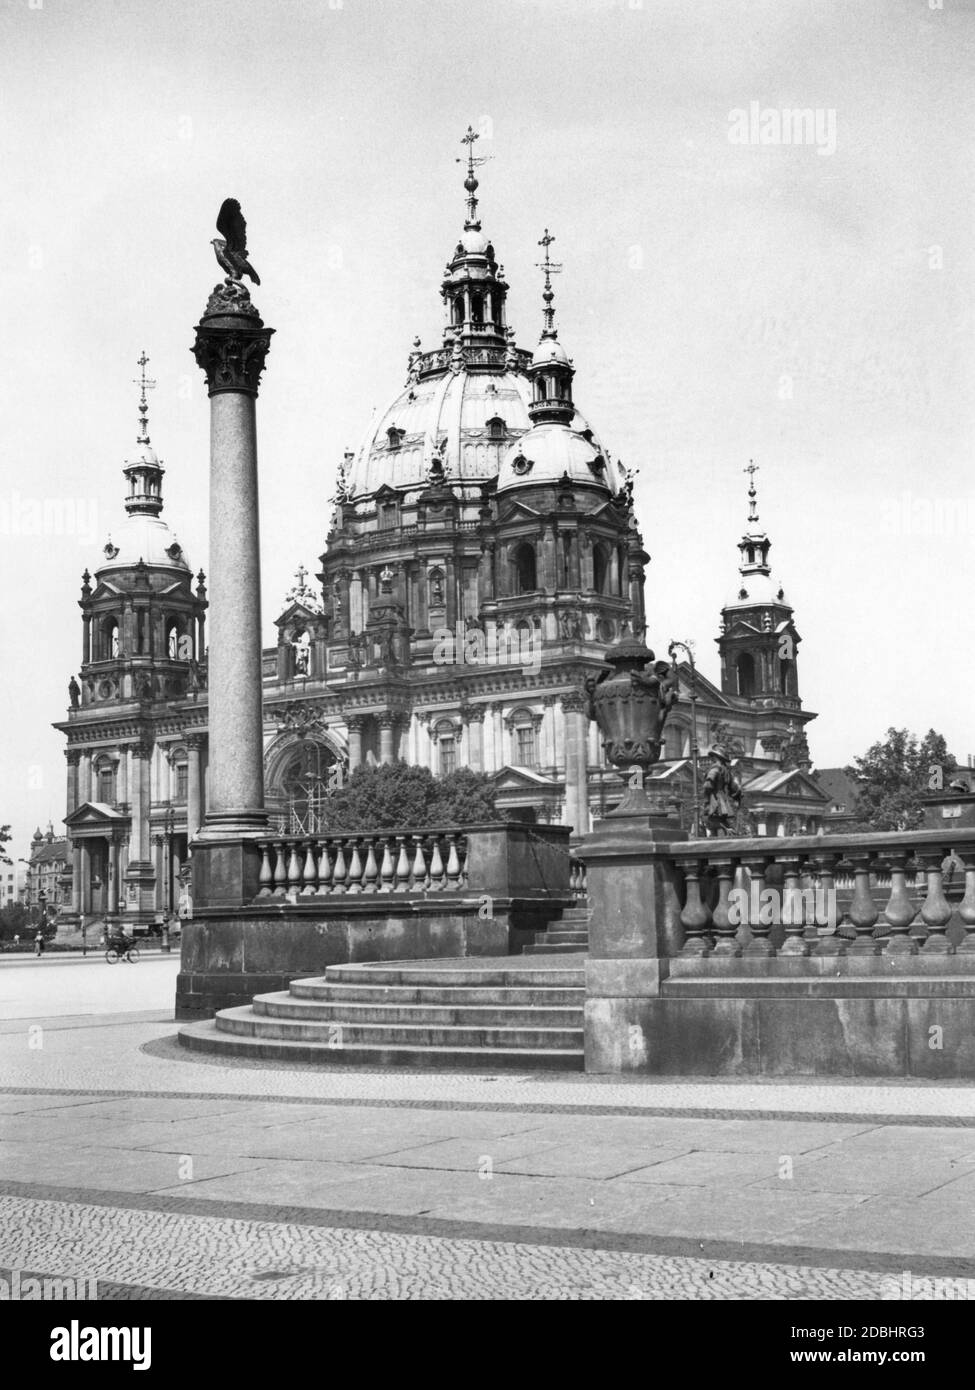 The photograph from 1934 shows the Eagle Column, which stood in front ...